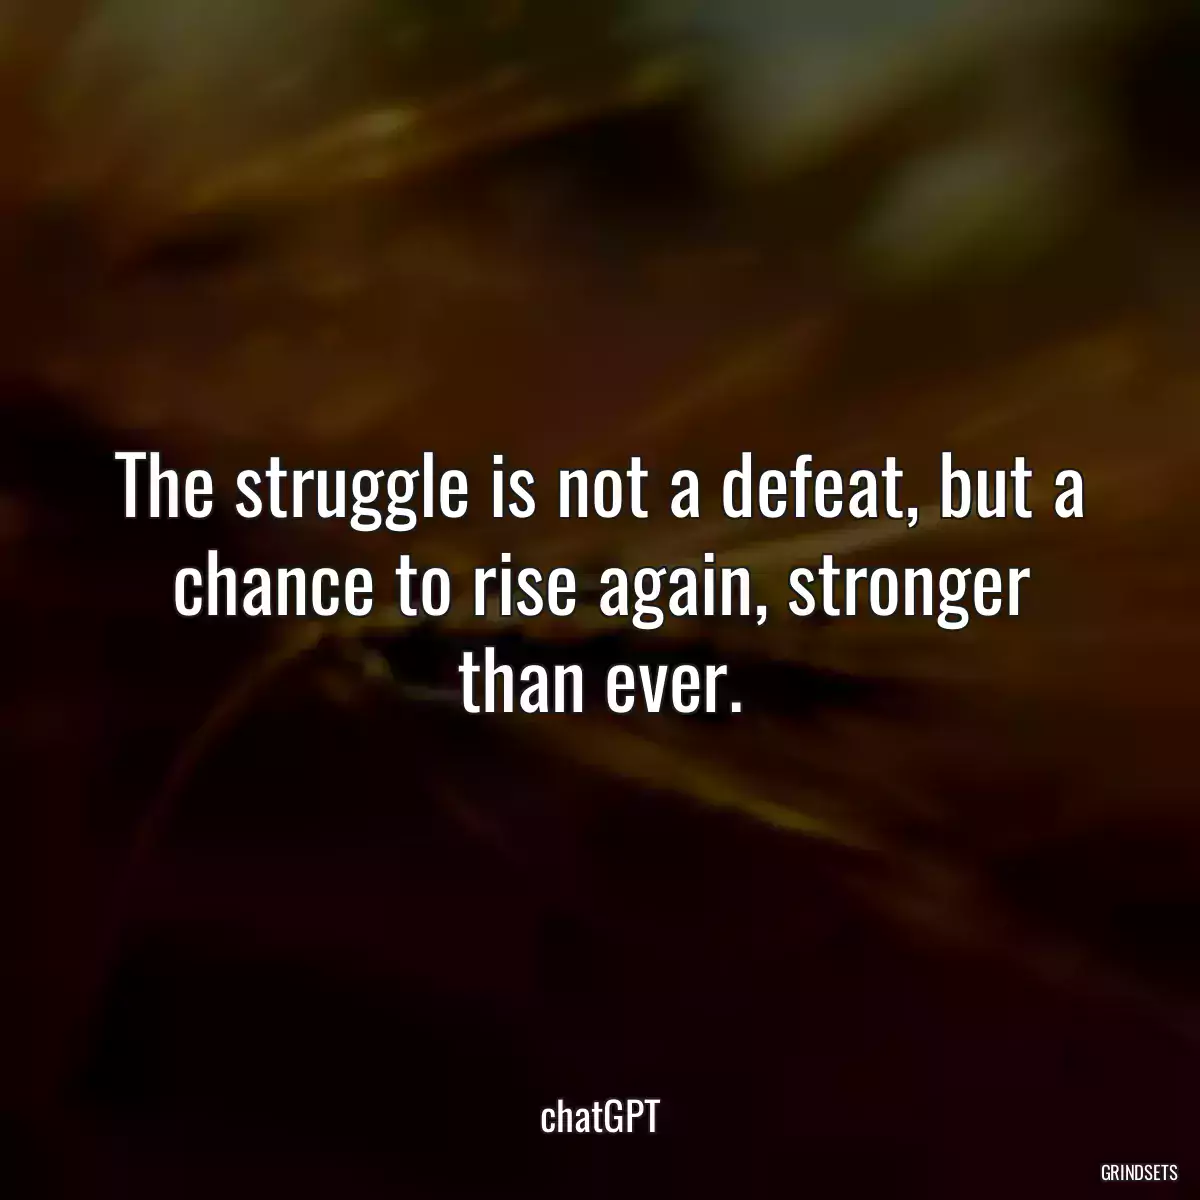 The struggle is not a defeat, but a chance to rise again, stronger than ever.